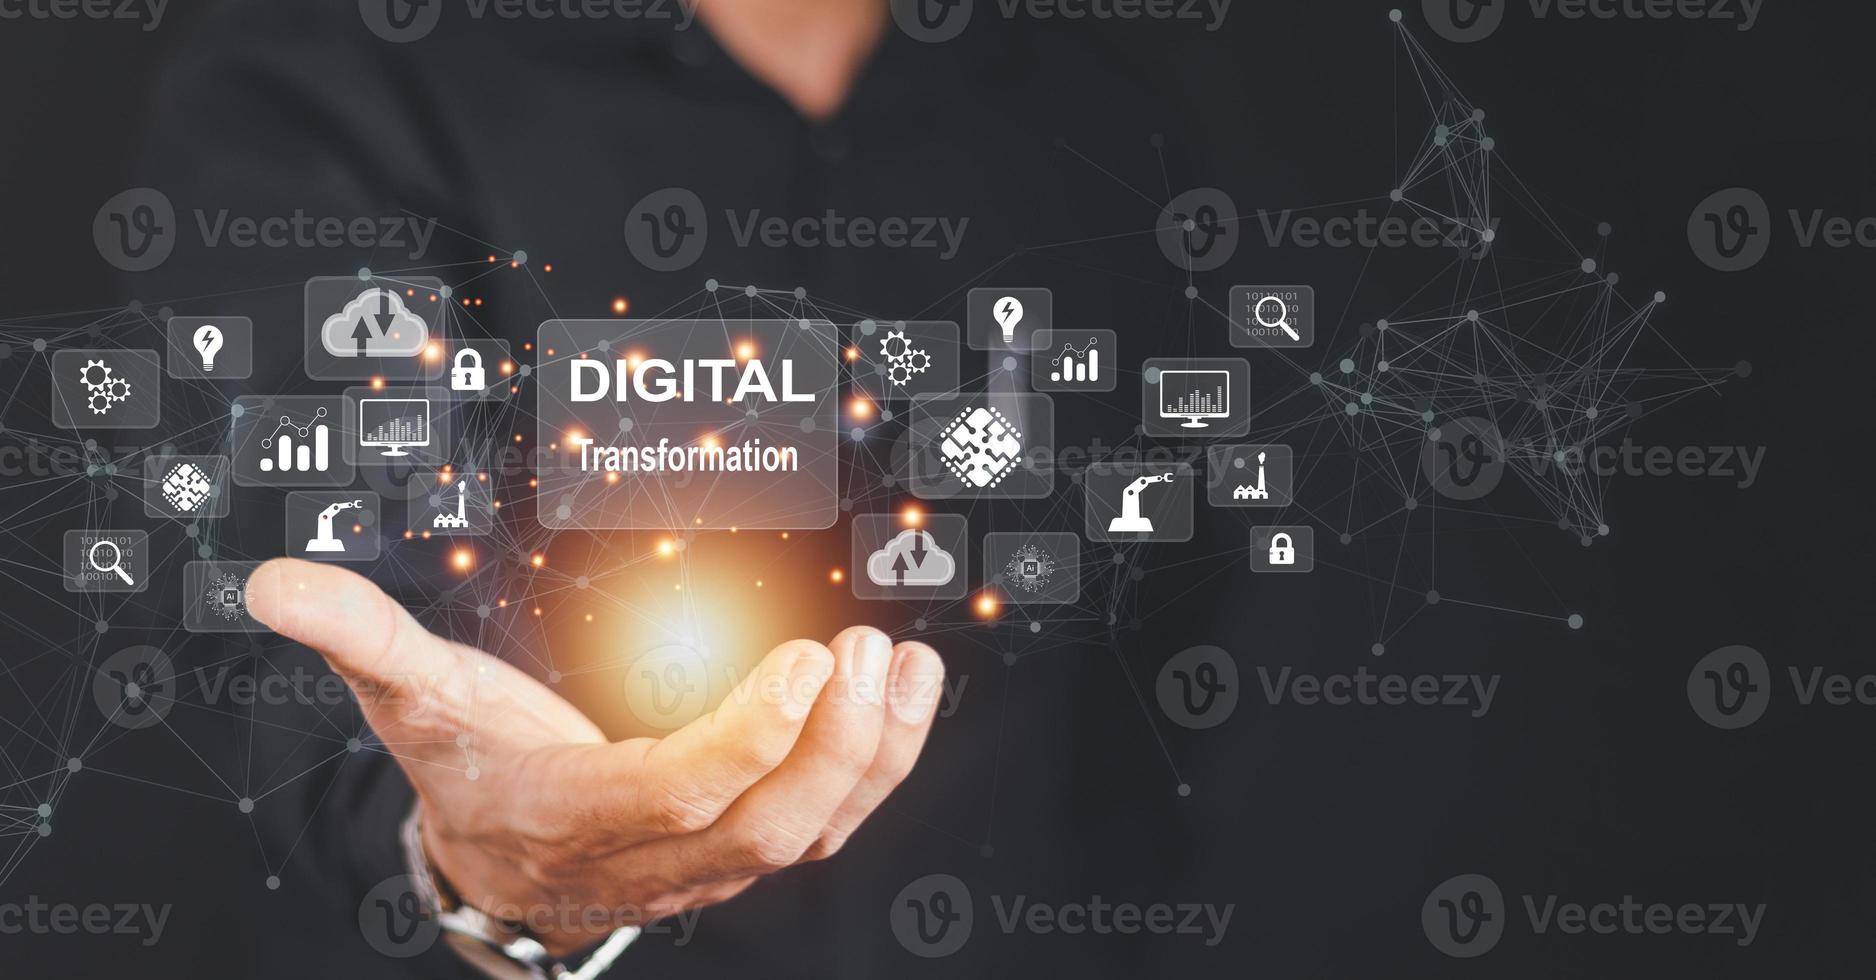 Digital transformation technology strategy, digitization and digitalization of business processes and data, optimize and automate operations, customer service management, internet and cloud computing photo